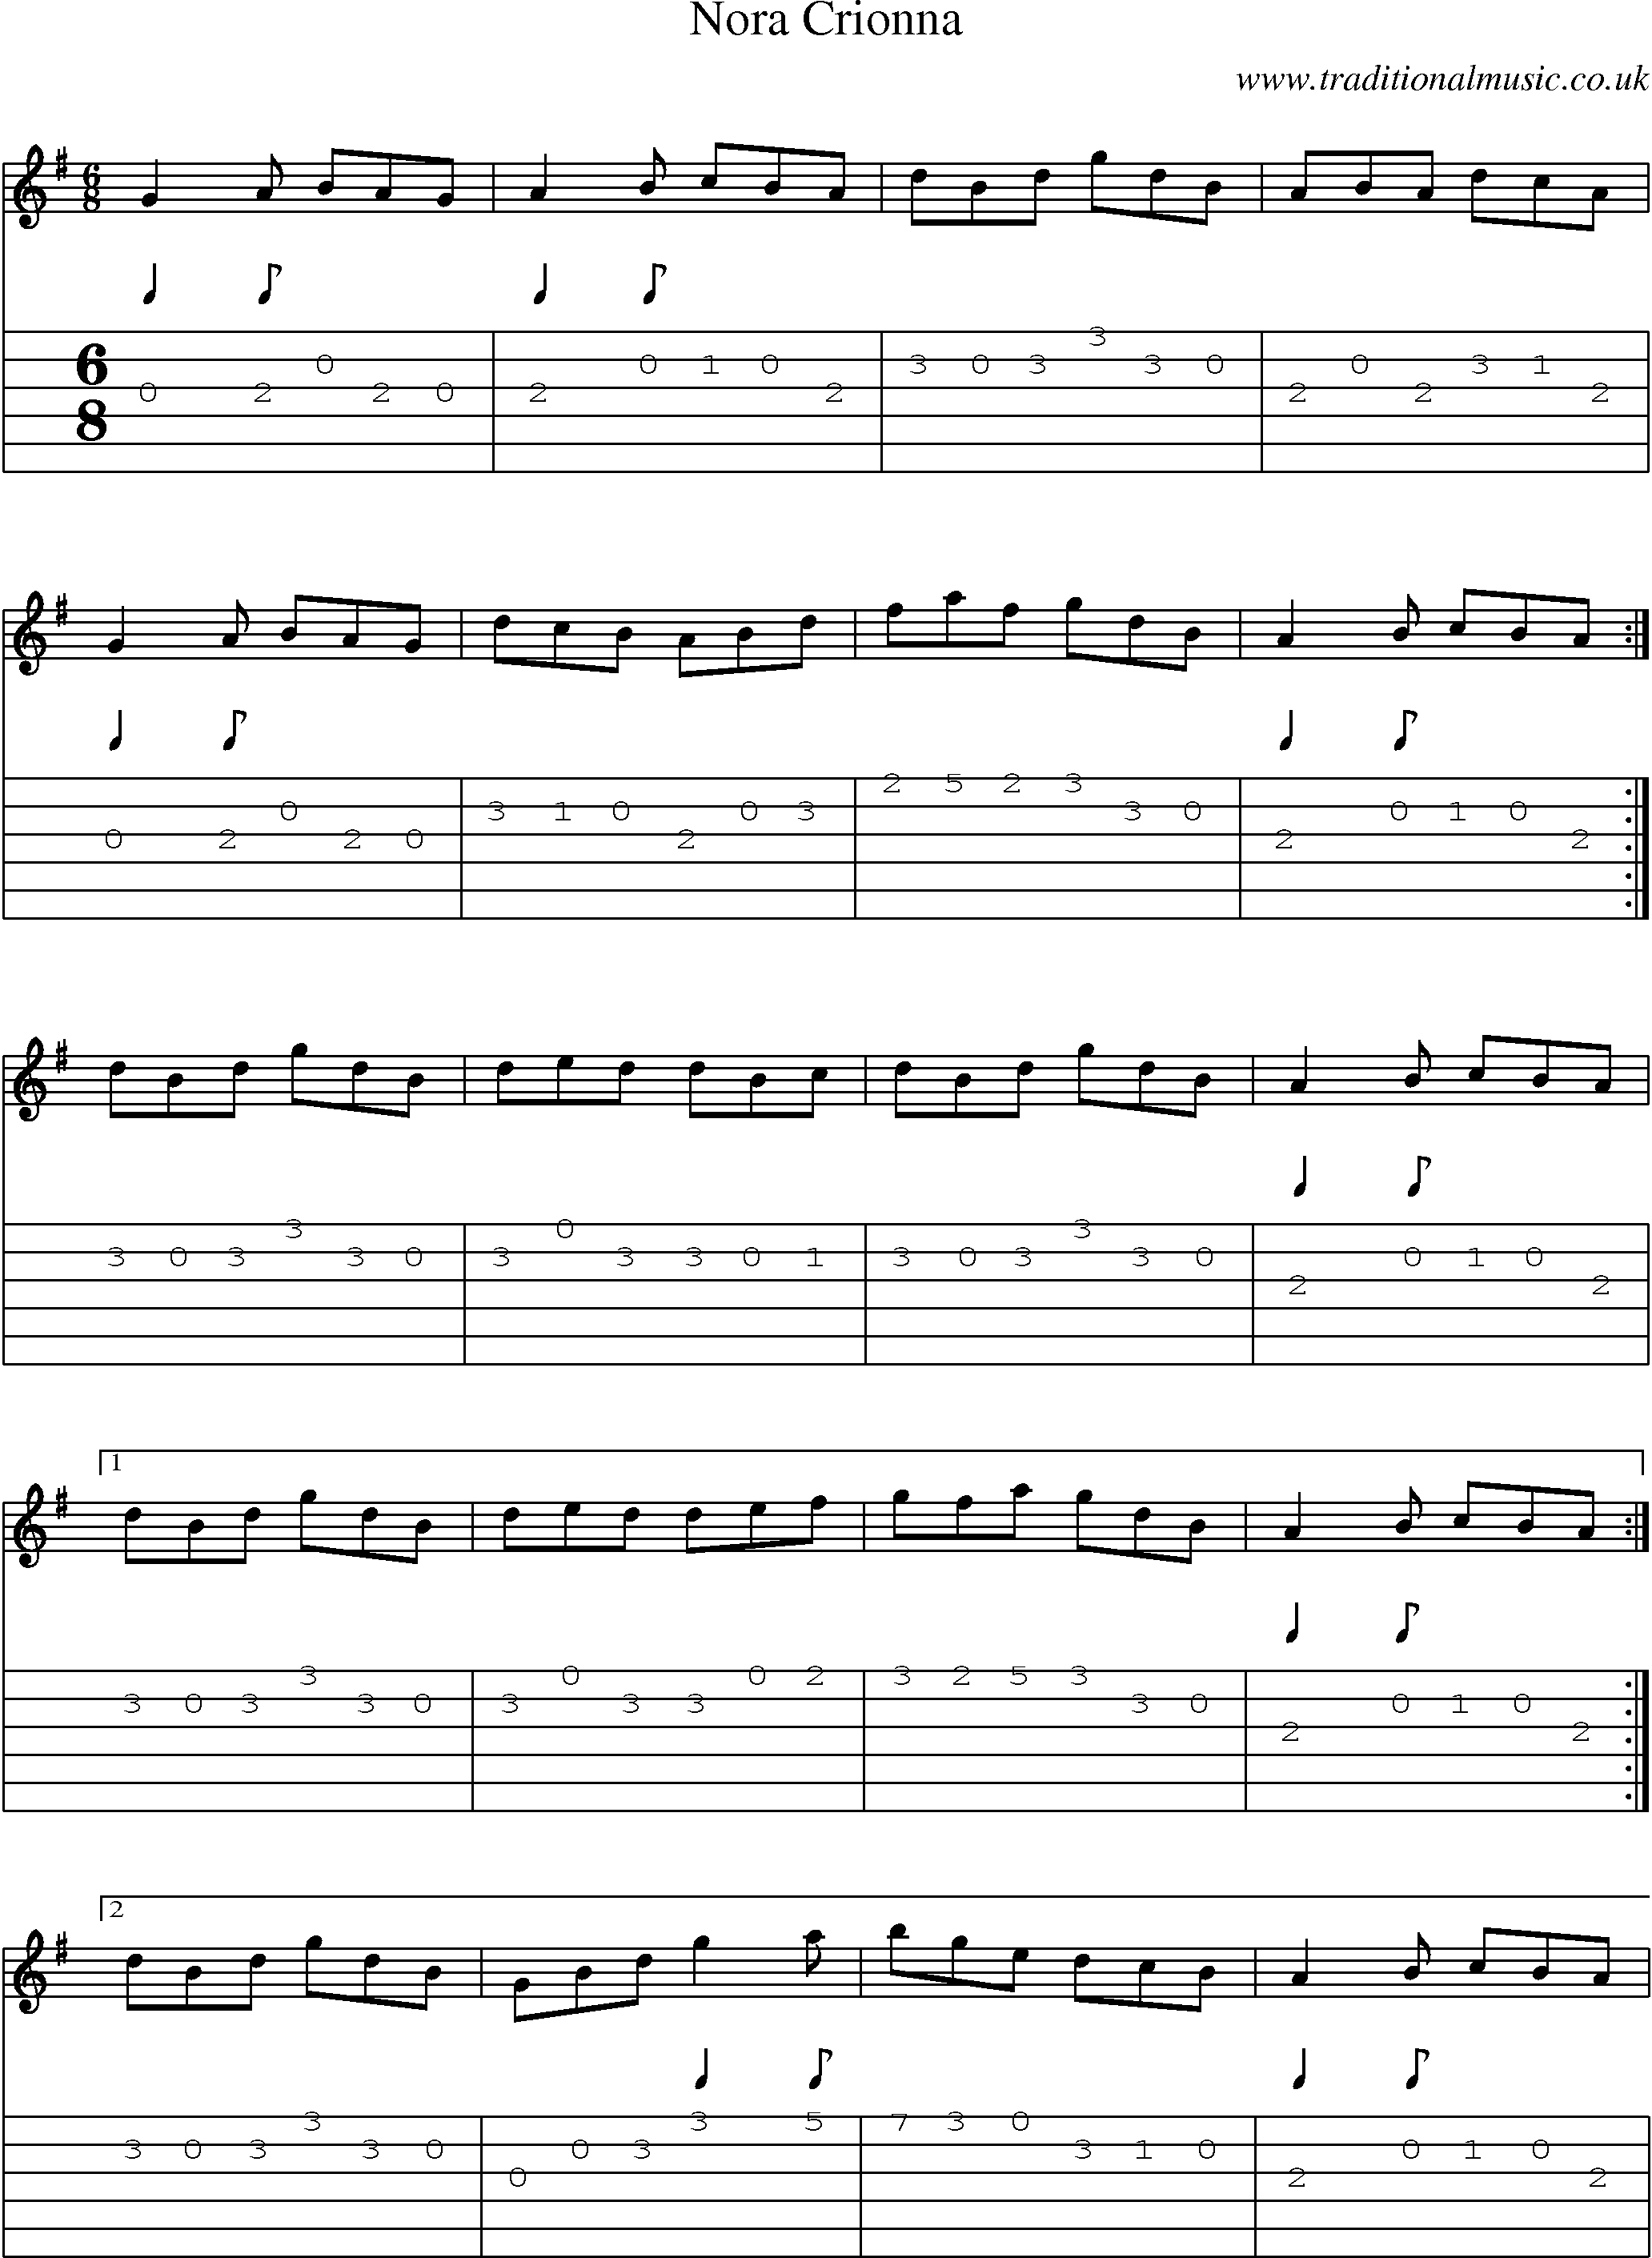 Music Score and Guitar Tabs for Nora Crionna